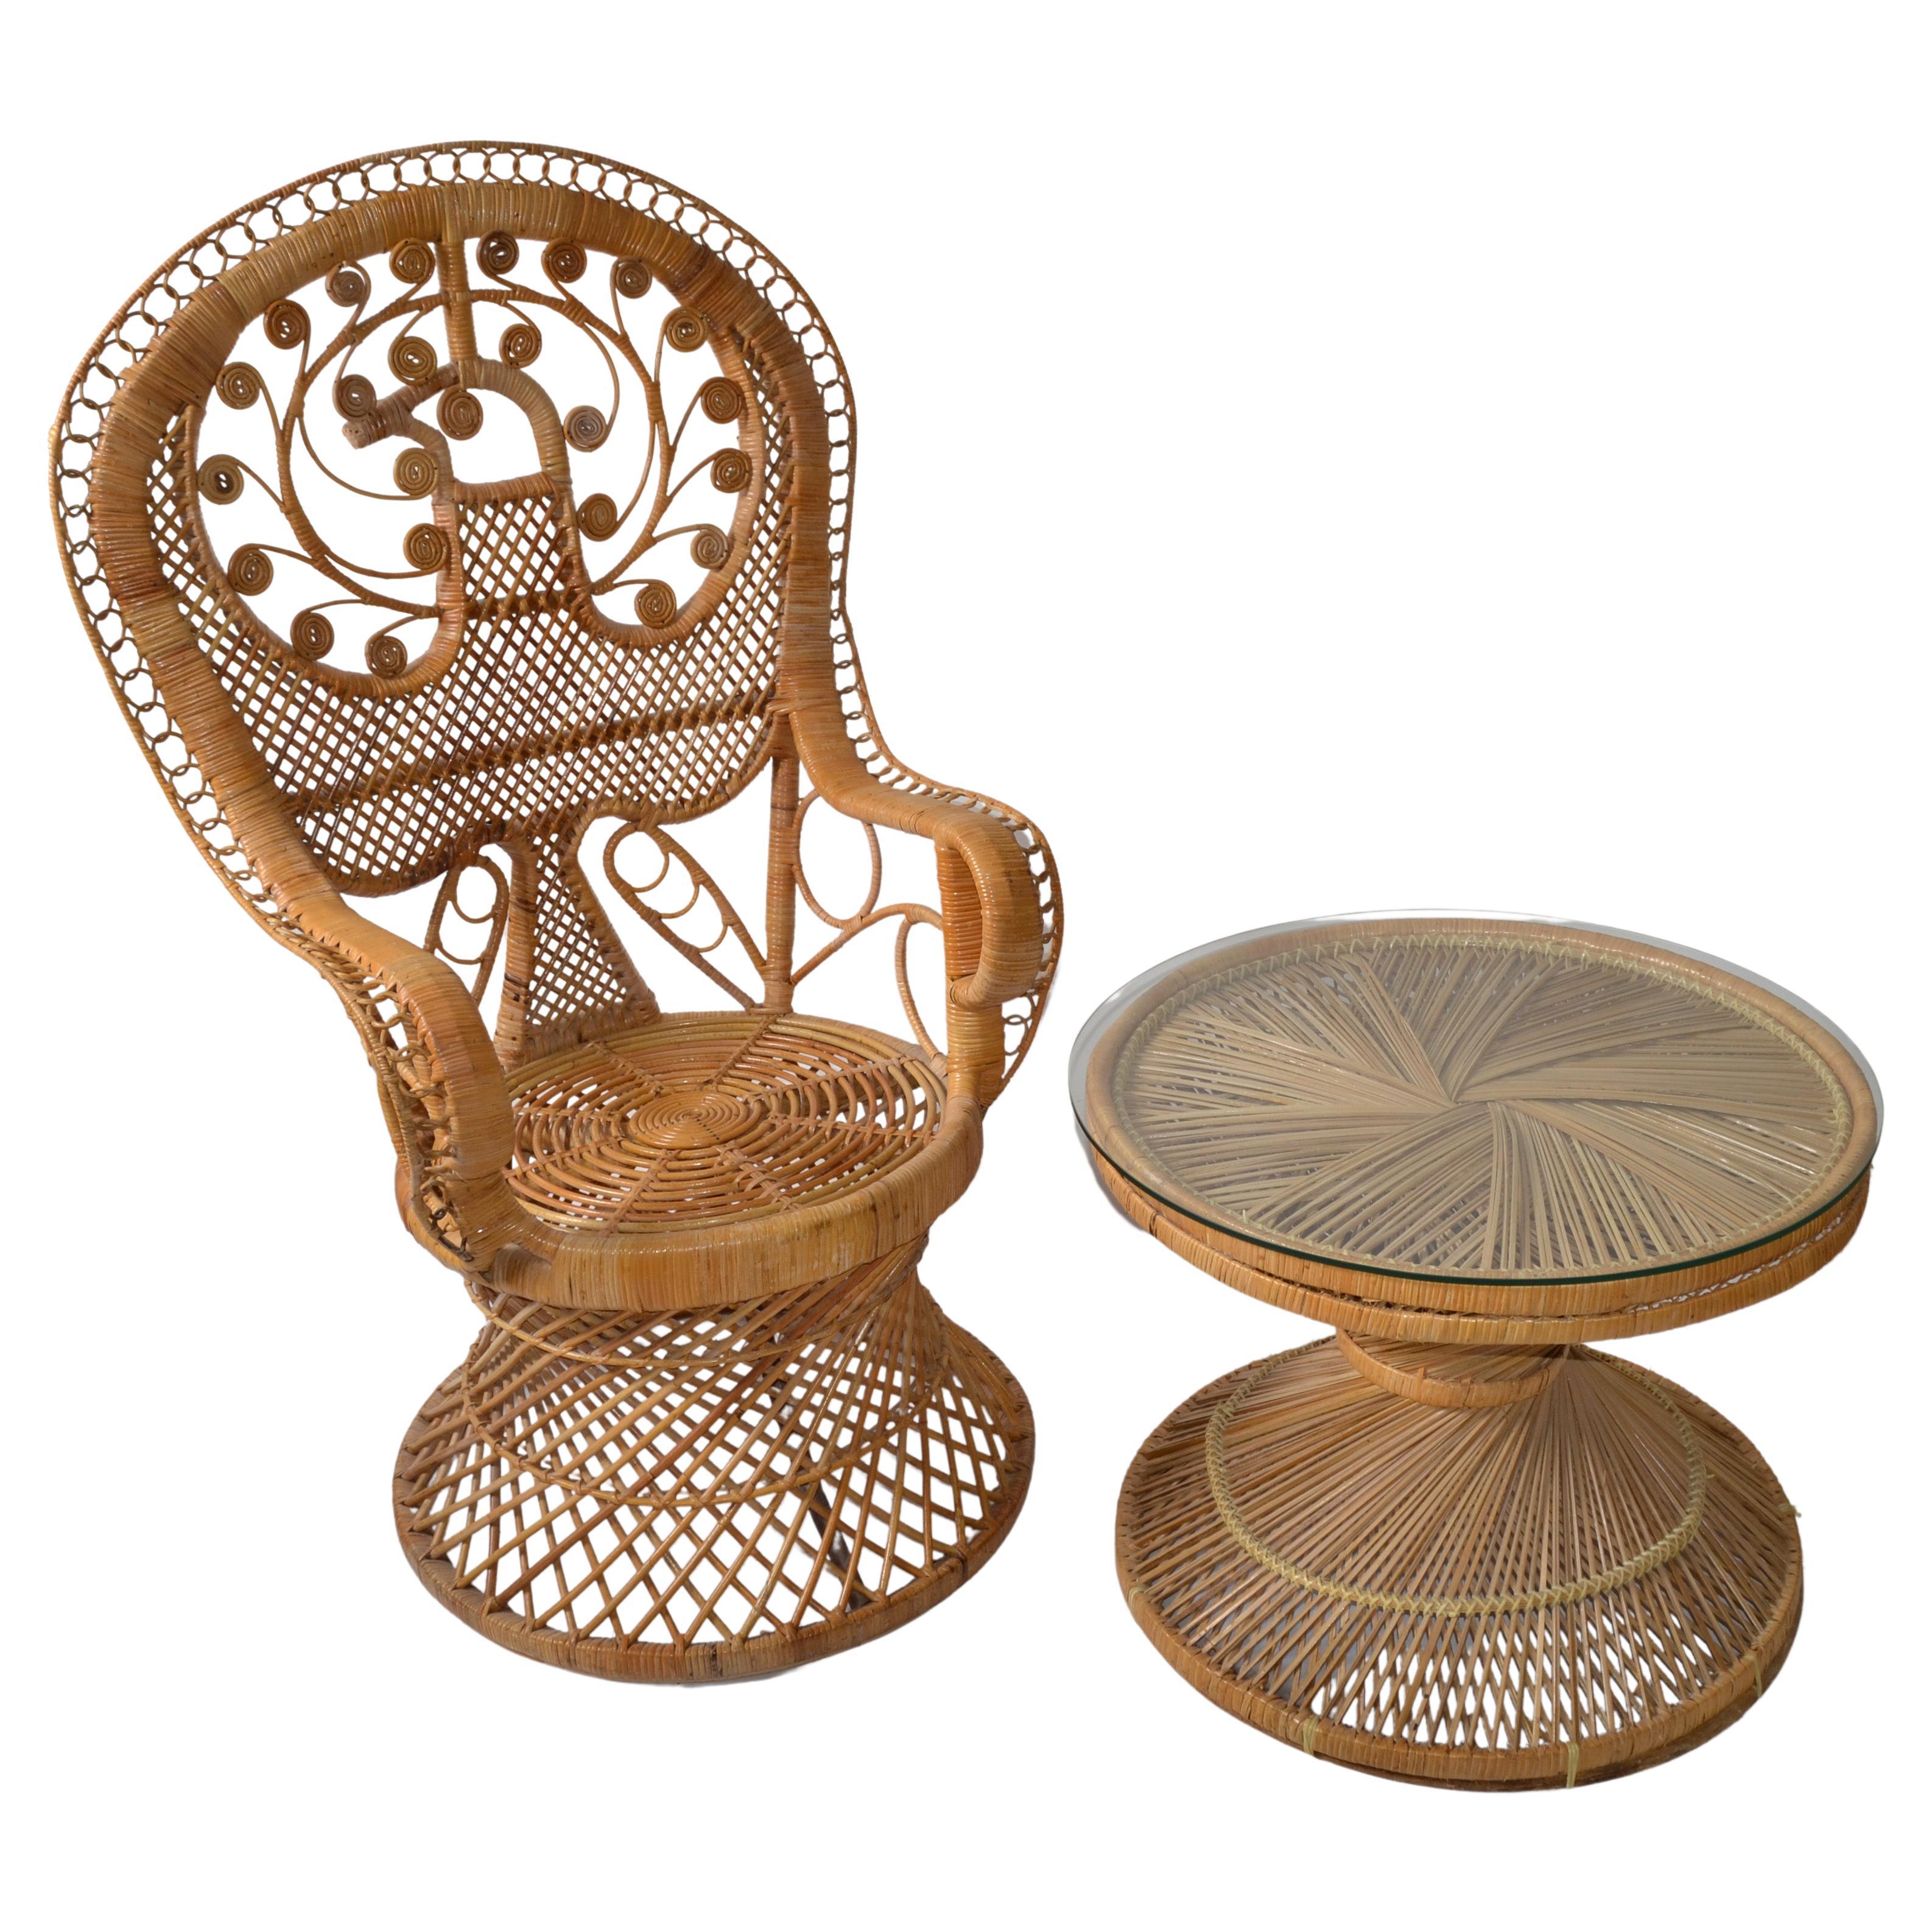 Coastal Vintage Round Rattan Accent Table Hand-Woven Wicker Caning Peacock Chair For Sale